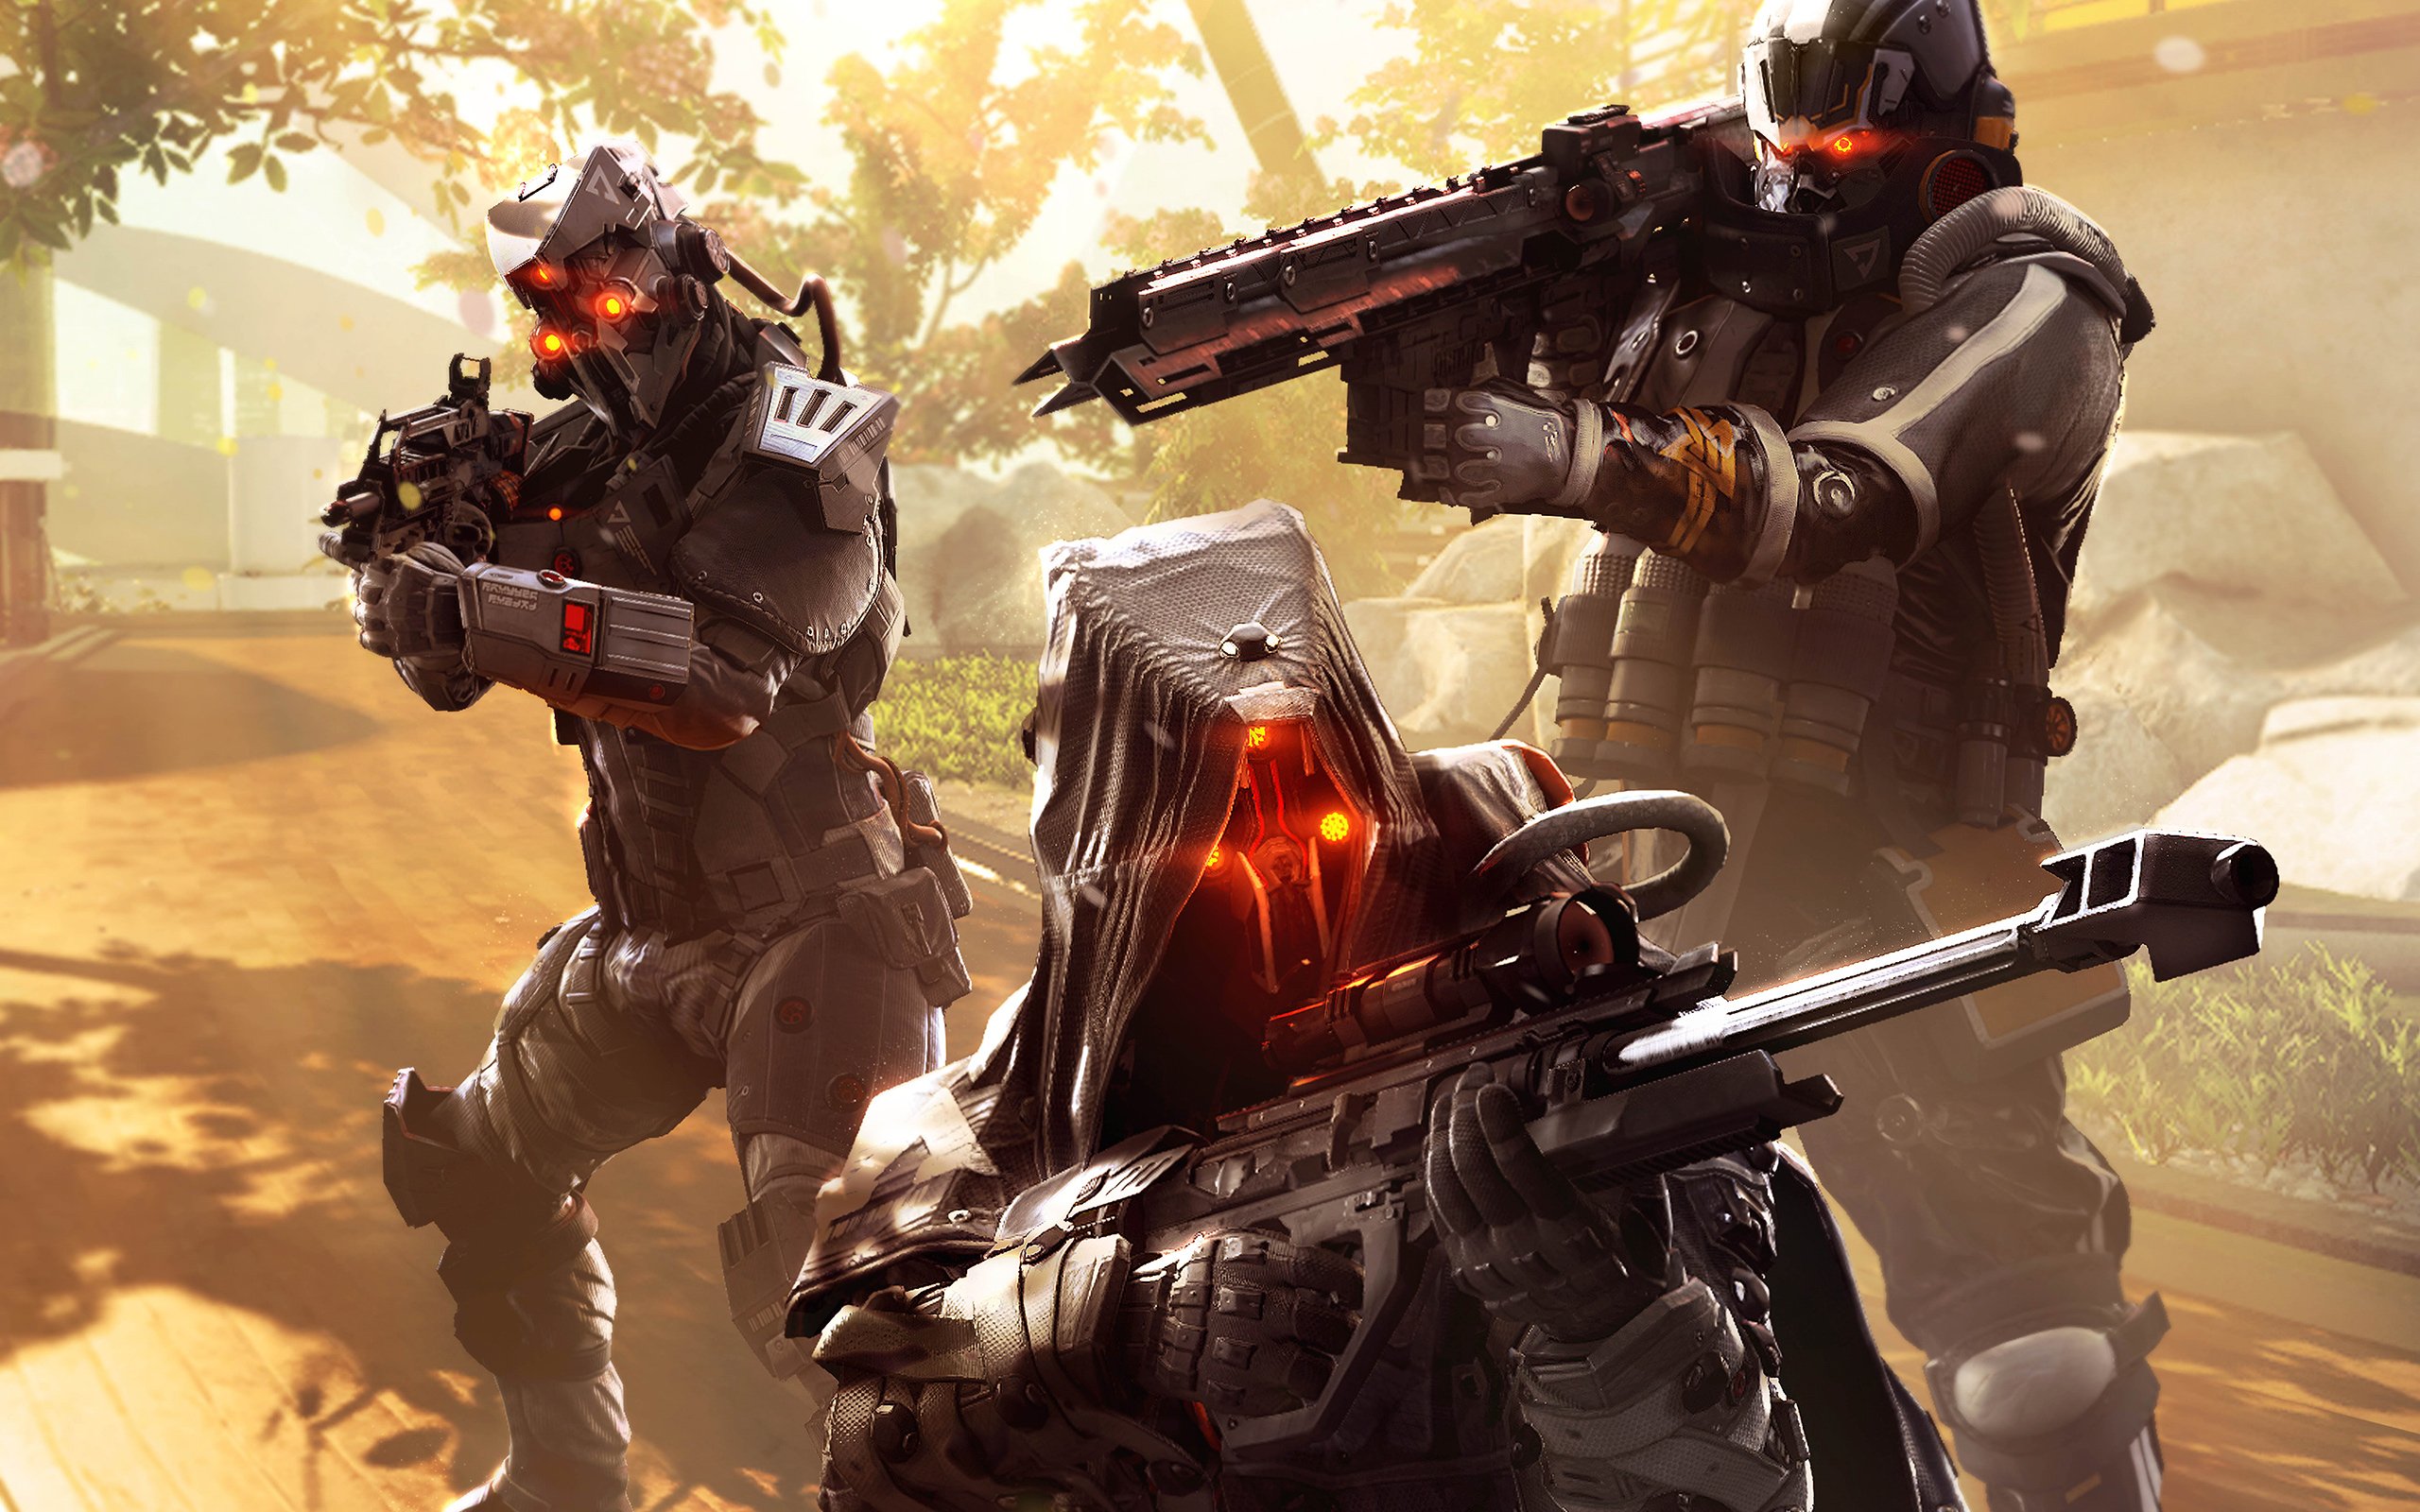 killzone, Shadow, Fall, Sci fi, Shooter, Action, Fighting, Tactical, Stealth, Warrior, Armor Wallpaper